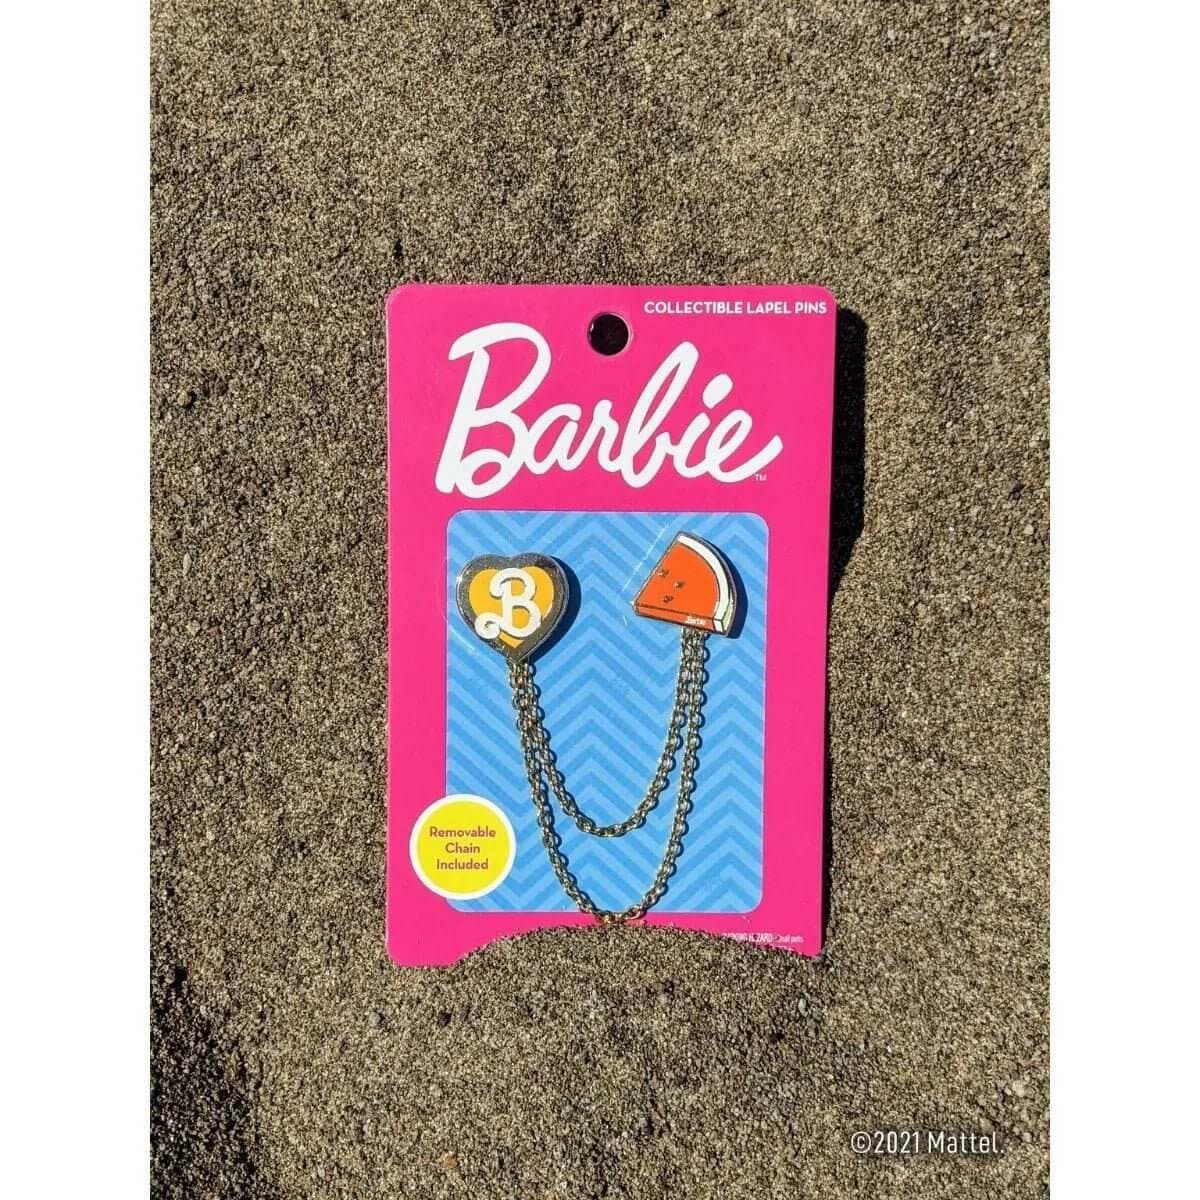 Barbie B Heart and Watermelon Pins with Removable Chains - Simon's Collectibles